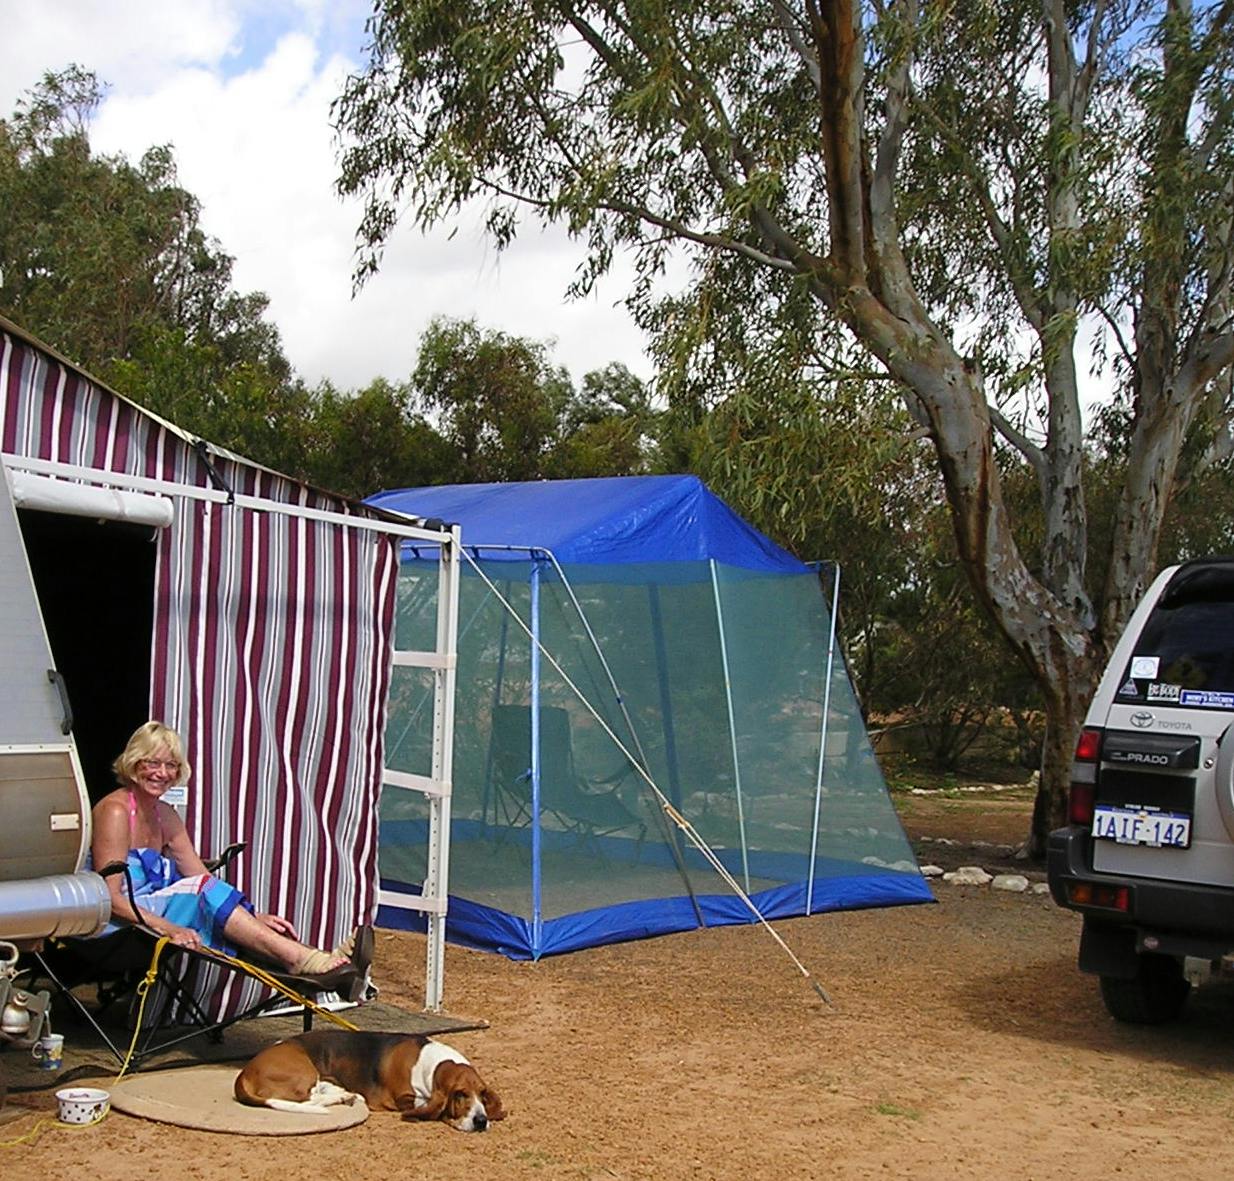 "Lady sitting with dog outside of a Caravan anex in a powered site"